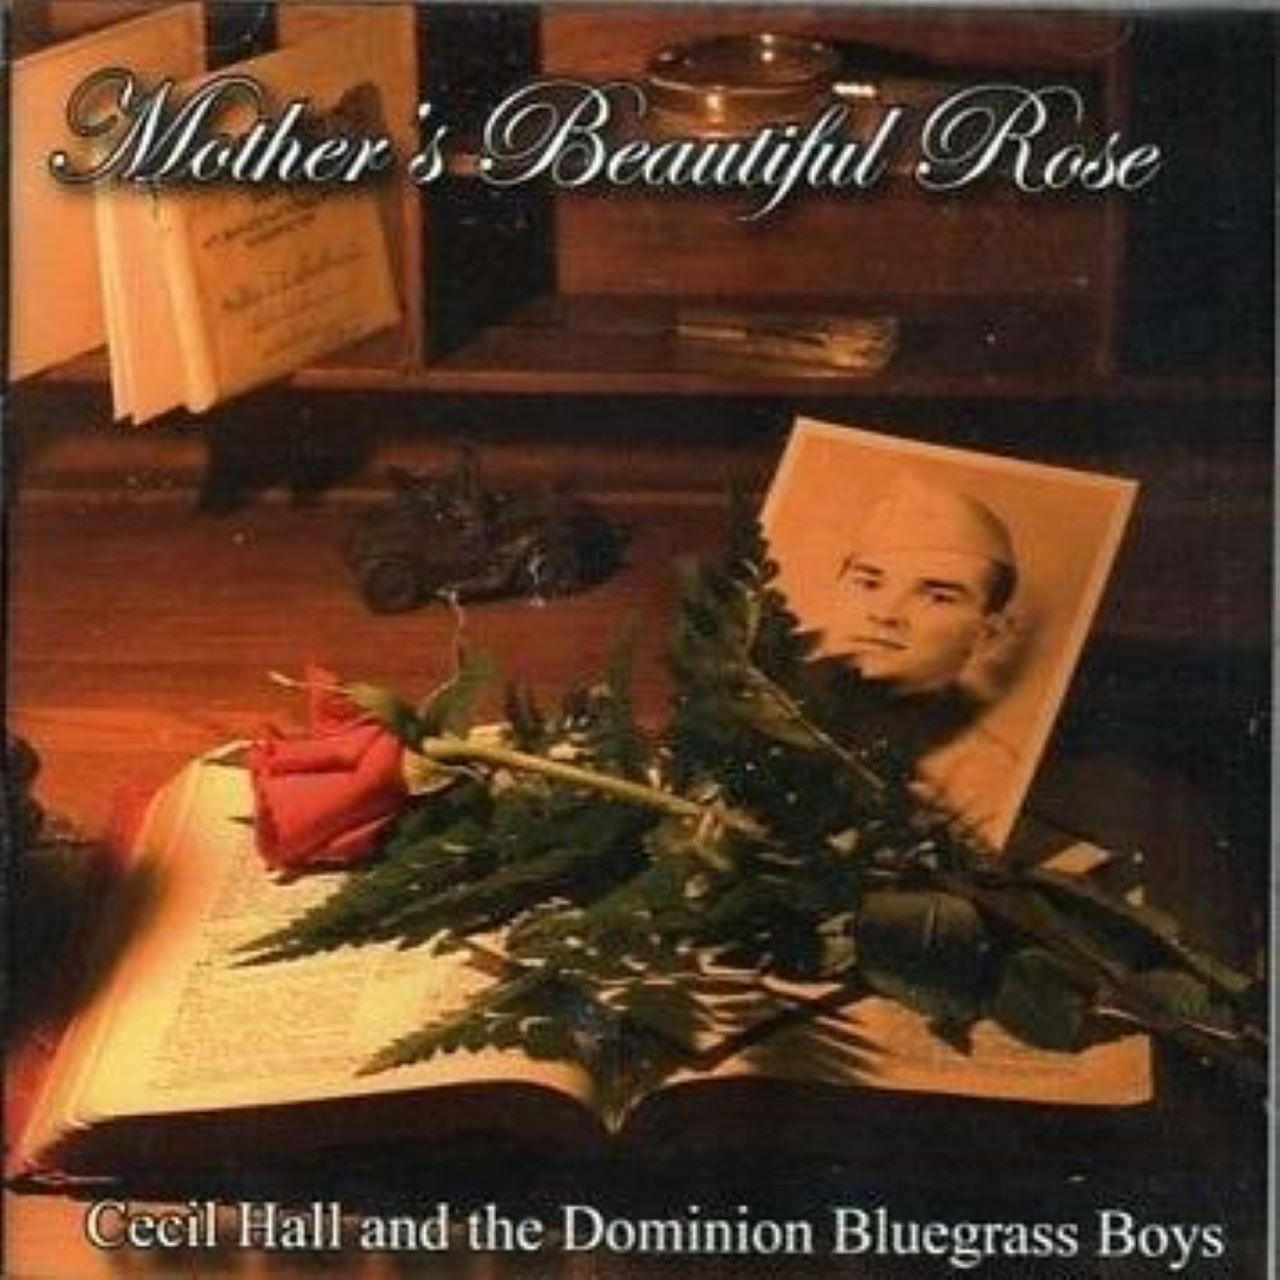 Cecil Hall And The Dominion Bluegrass Boys - Mother’s Beautiful Rose cover album